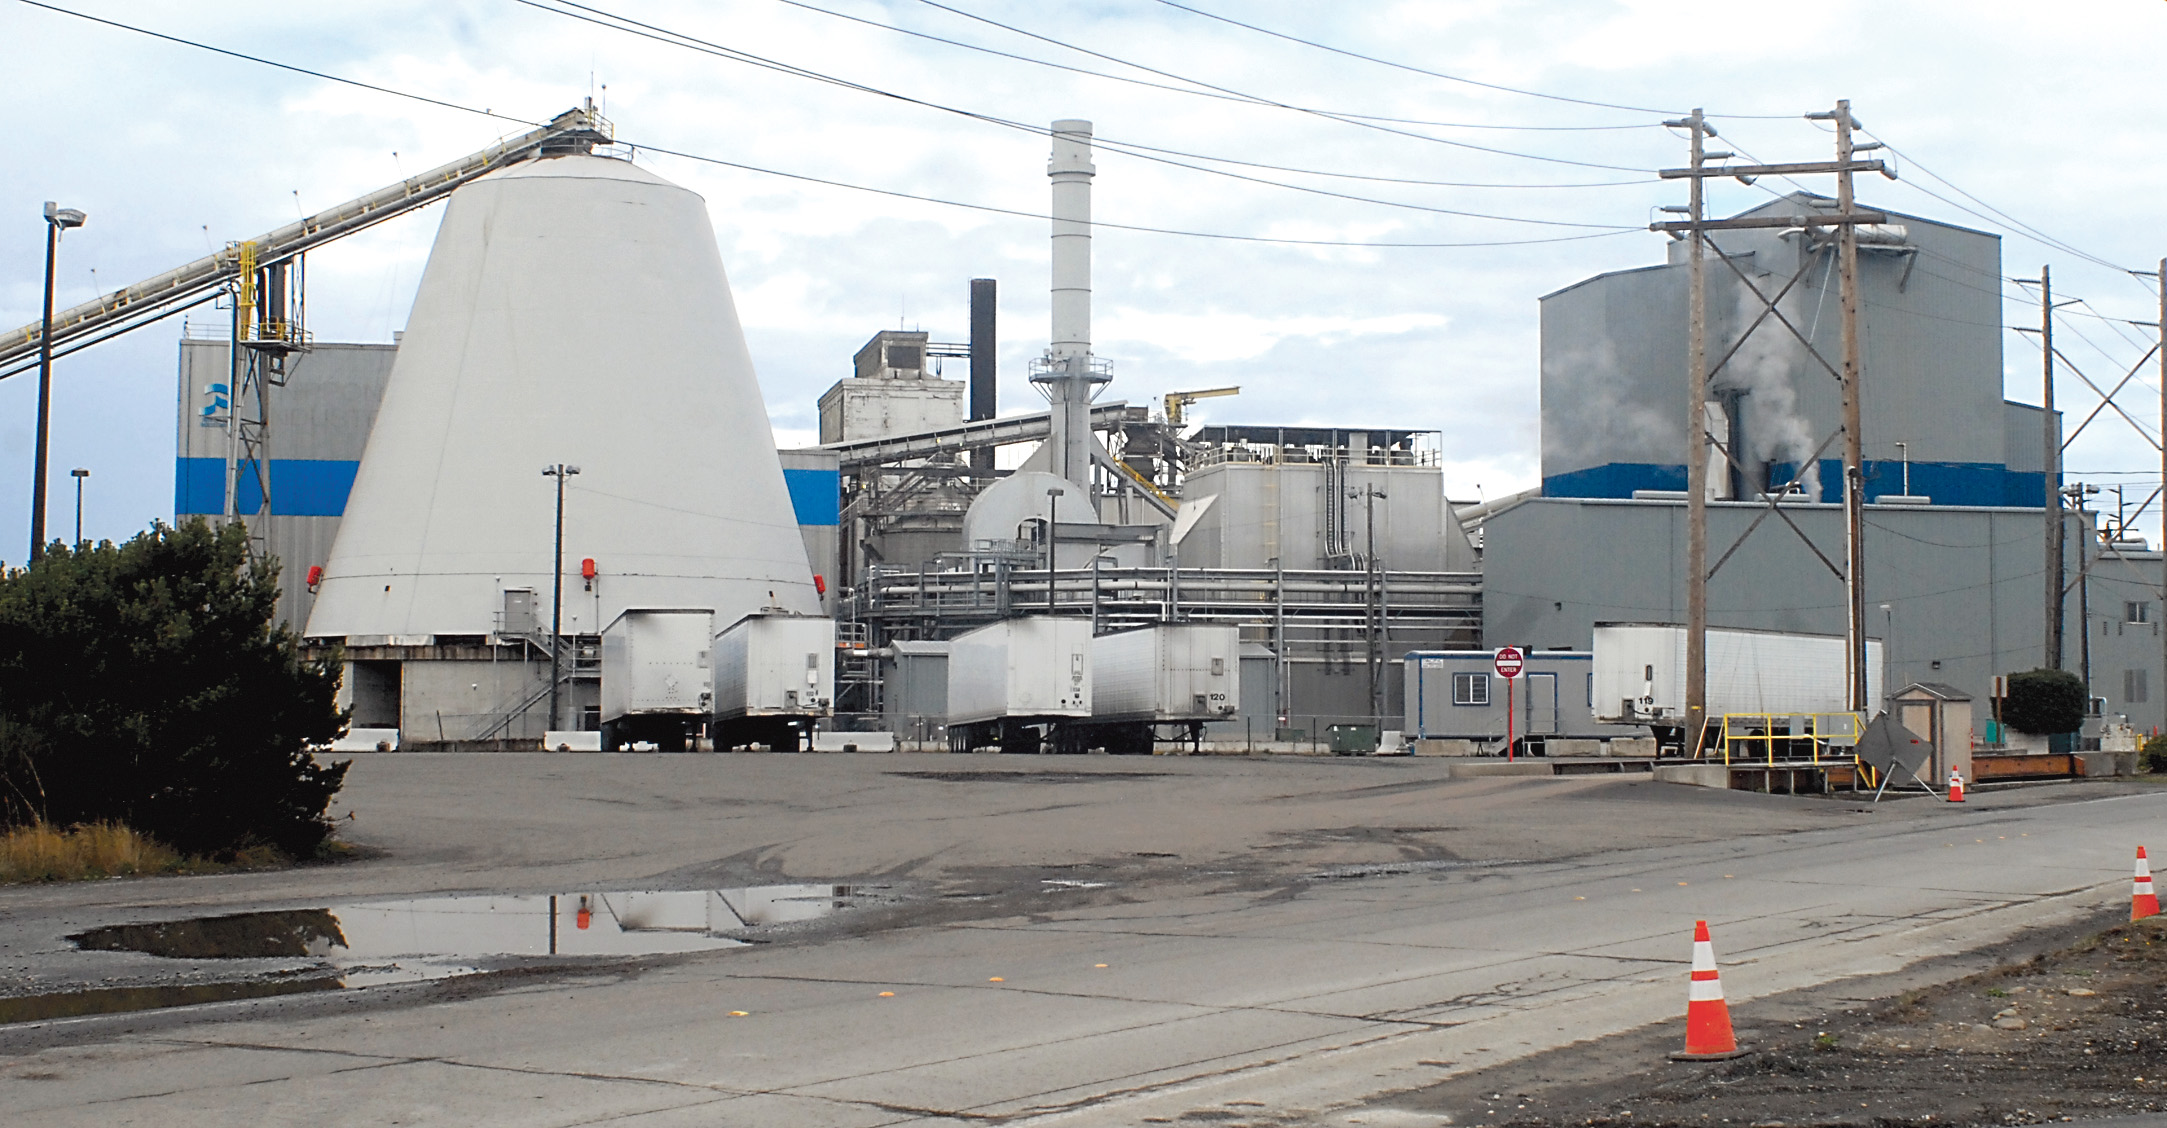 The Nippon Paper Industries USA cogeneration plant in Port Angeles